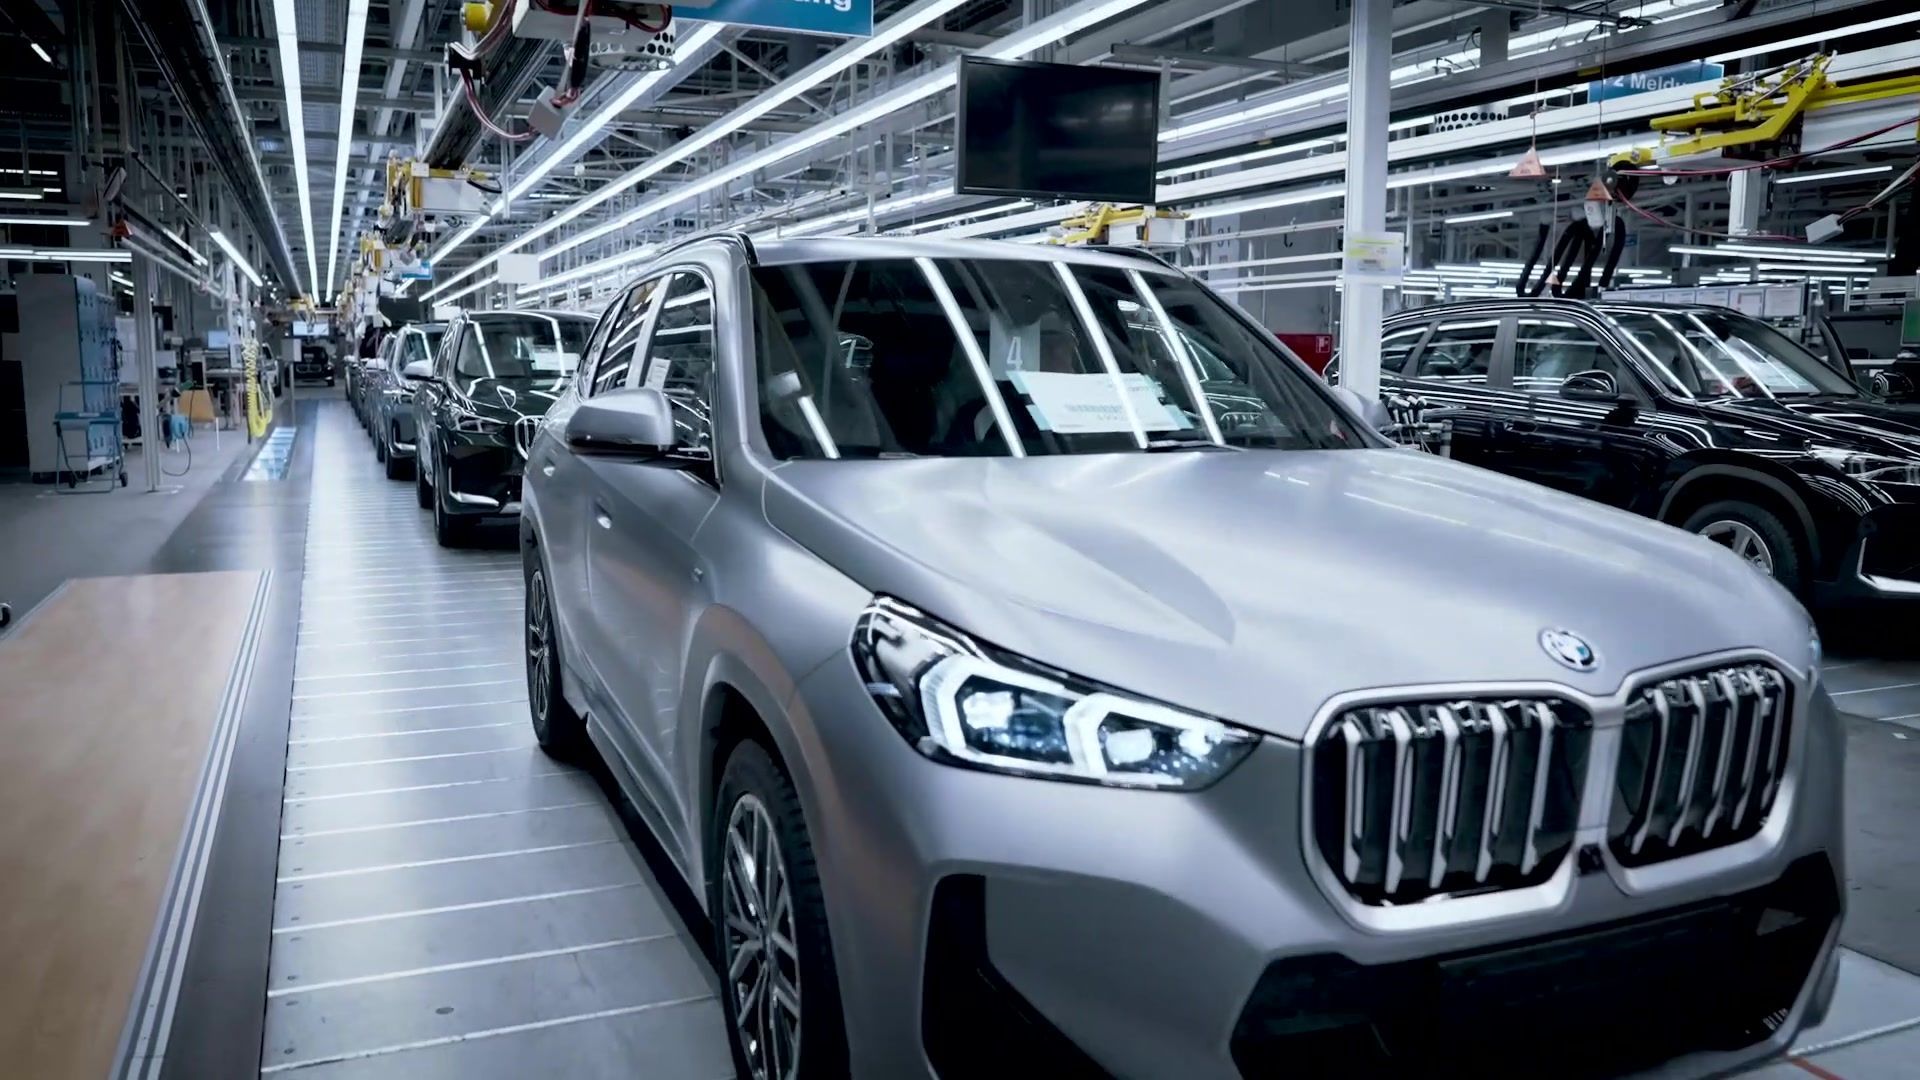 Production of the all-electric BMW iX1 at the BMW Group plant in Regensburg